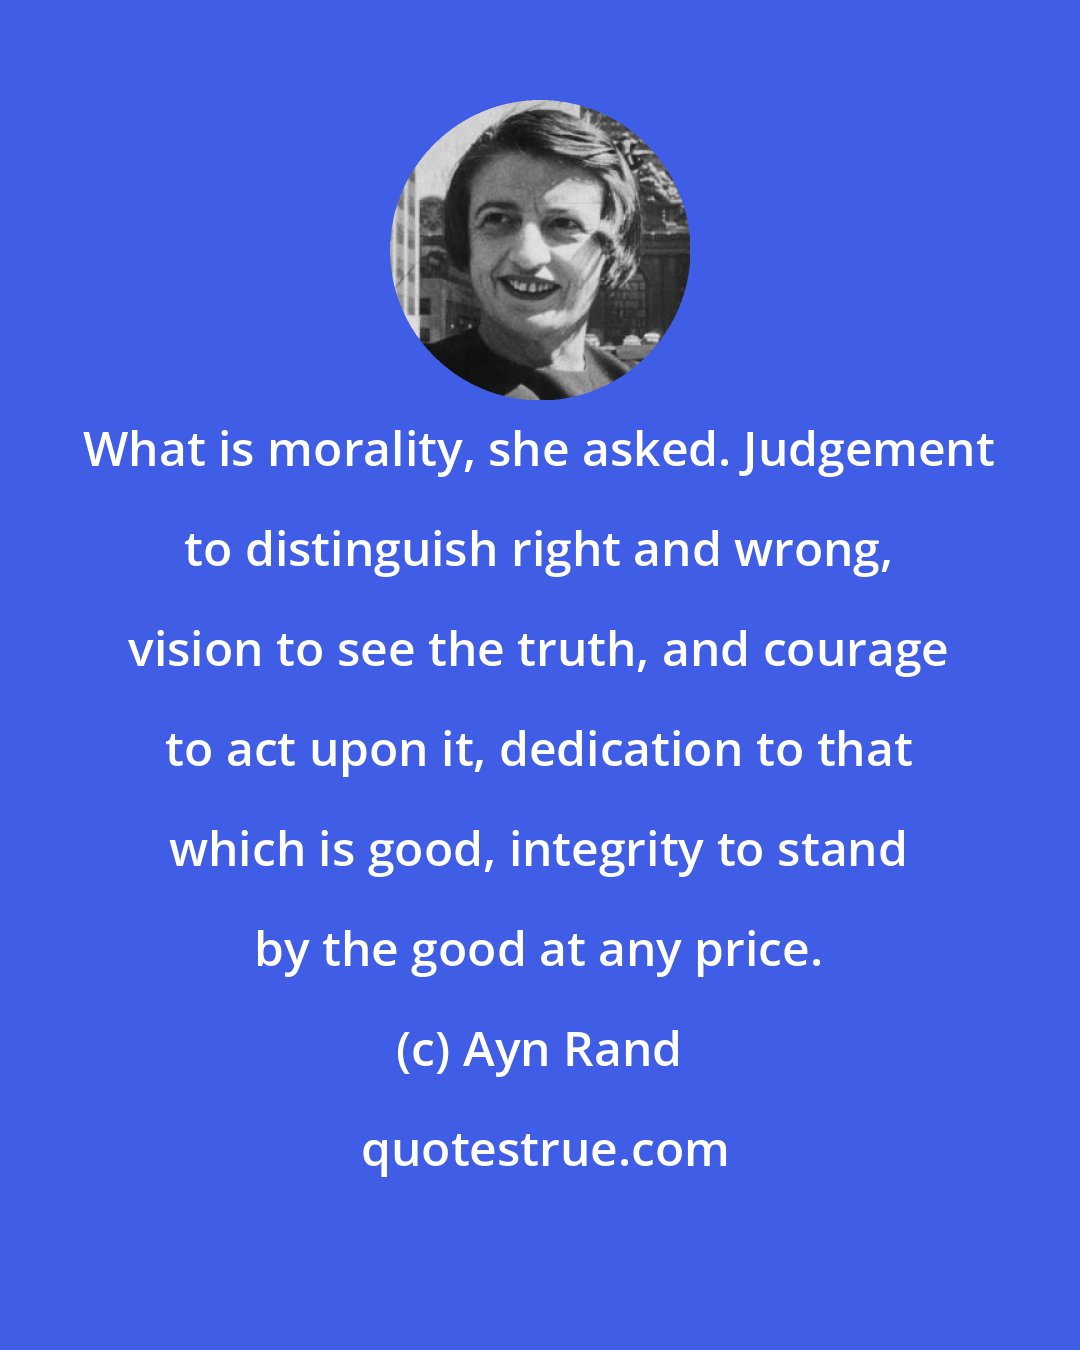 Ayn Rand: What is morality, she asked. Judgement to distinguish right and wrong, vision to see the truth, and courage to act upon it, dedication to that which is good, integrity to stand by the good at any price.